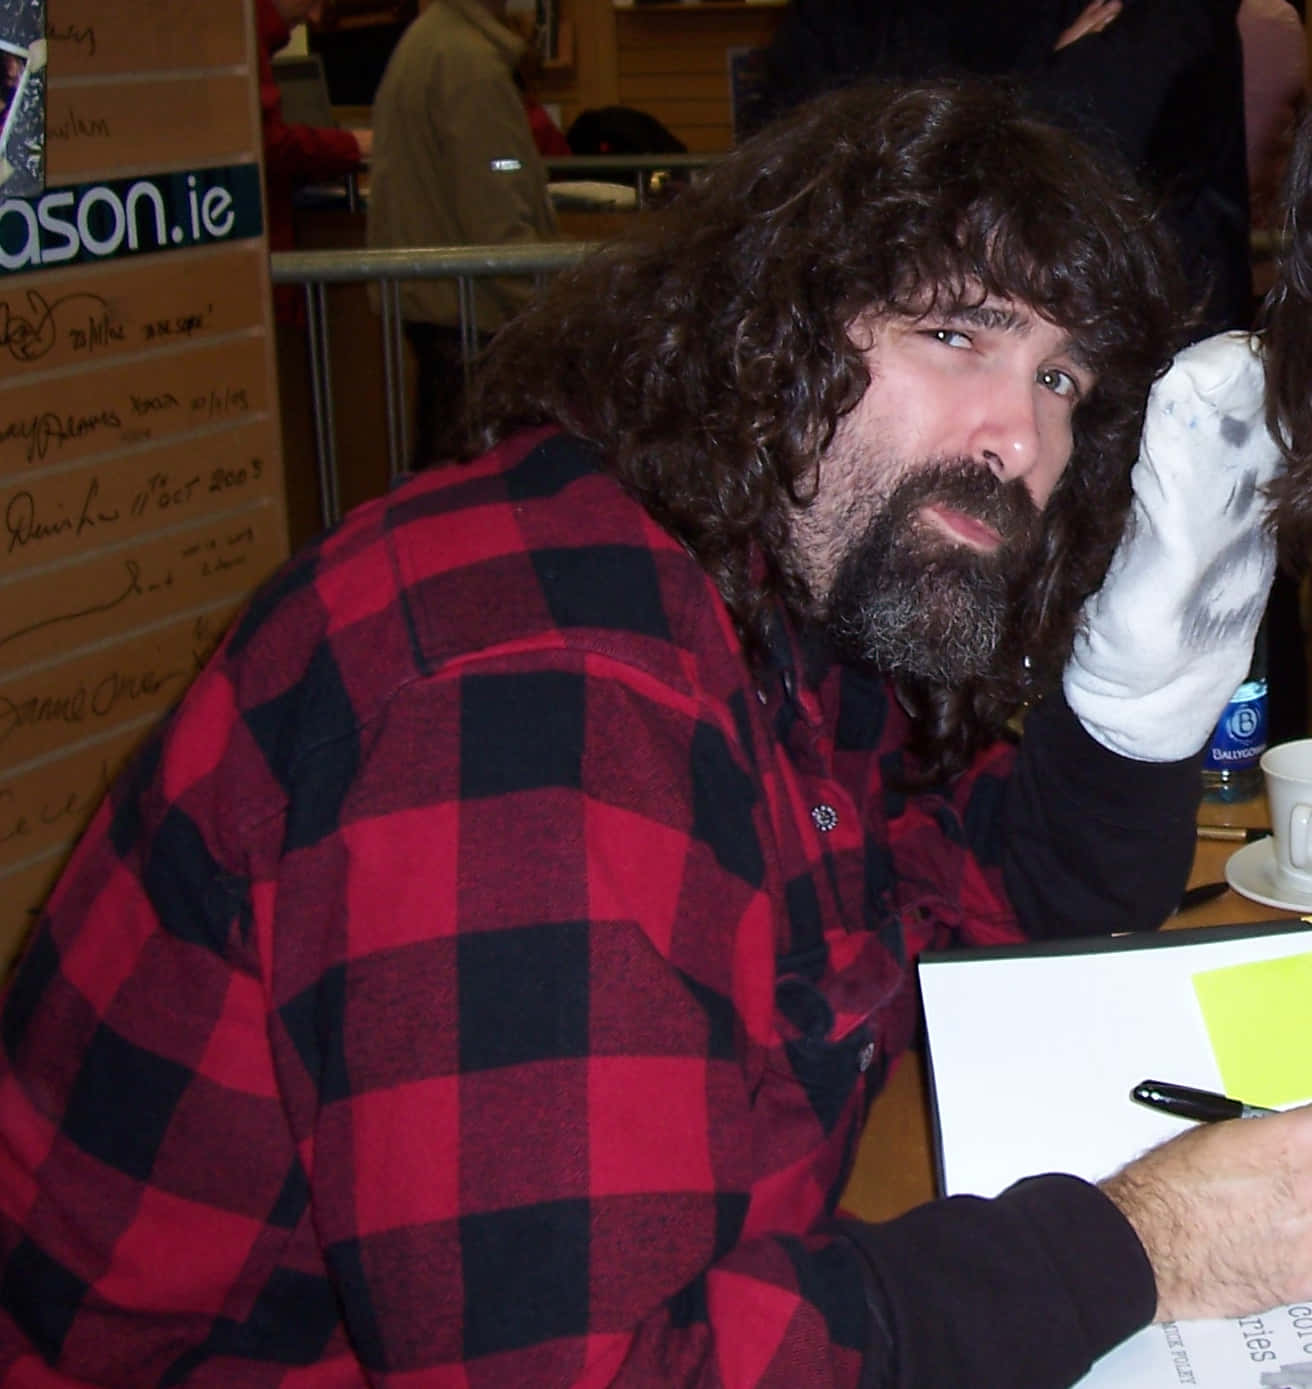 American Former Wrestler Mick Foley Engaging with Fans at a Book Signing Event Wallpaper